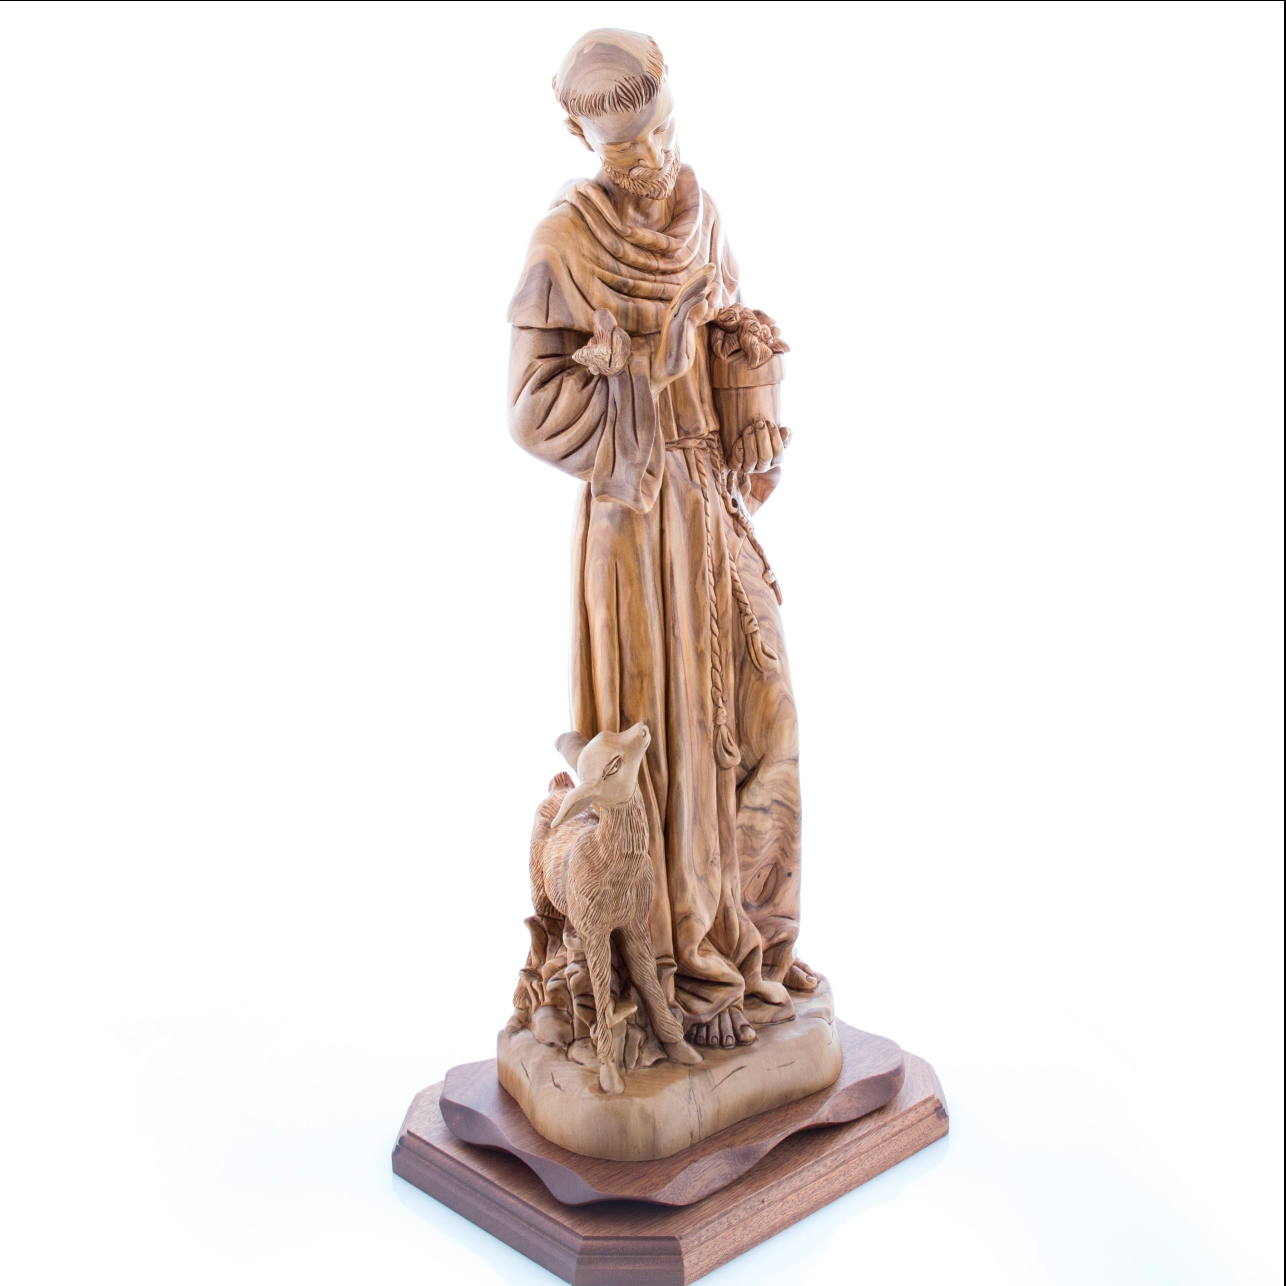 Saint Francis of Assisi Standing next to Deer Animal, Carved Masterpiece 21 Inch Tall Sculpture Hand Carved by Christian Artisans from Olive Wood Grown in the Holy Land